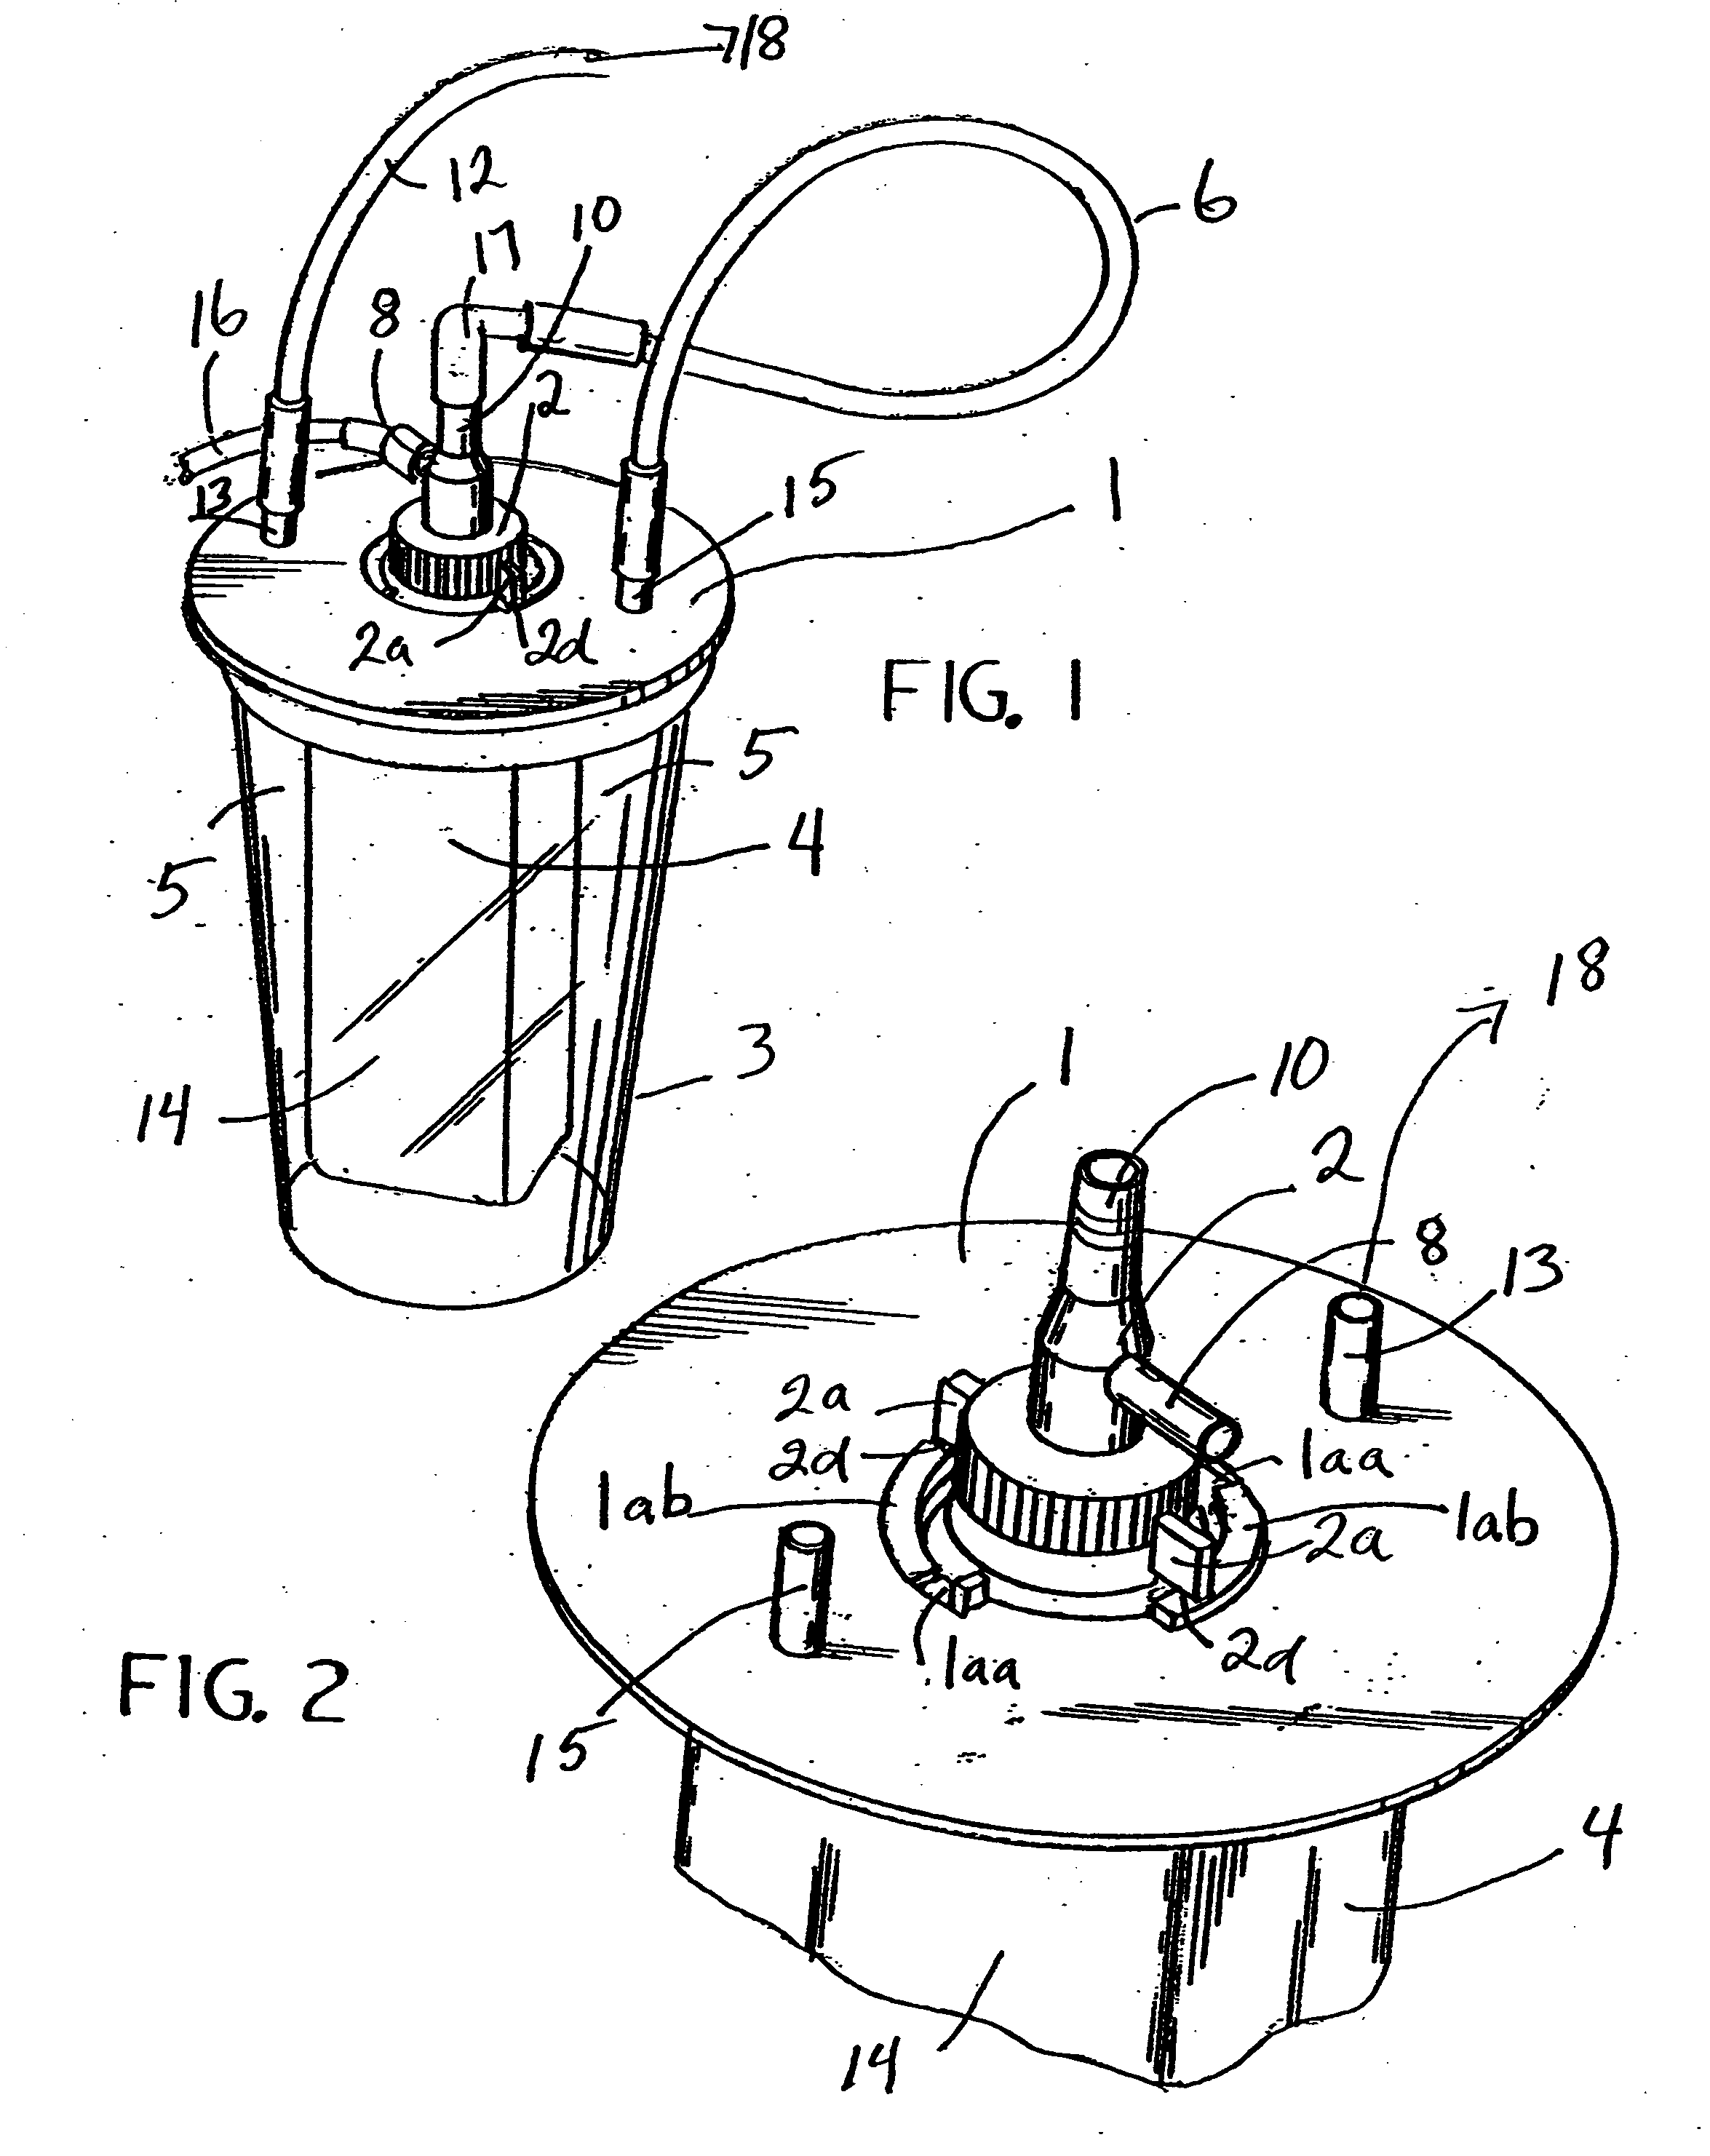 Method and apparatus for converting supplies and reducing waste